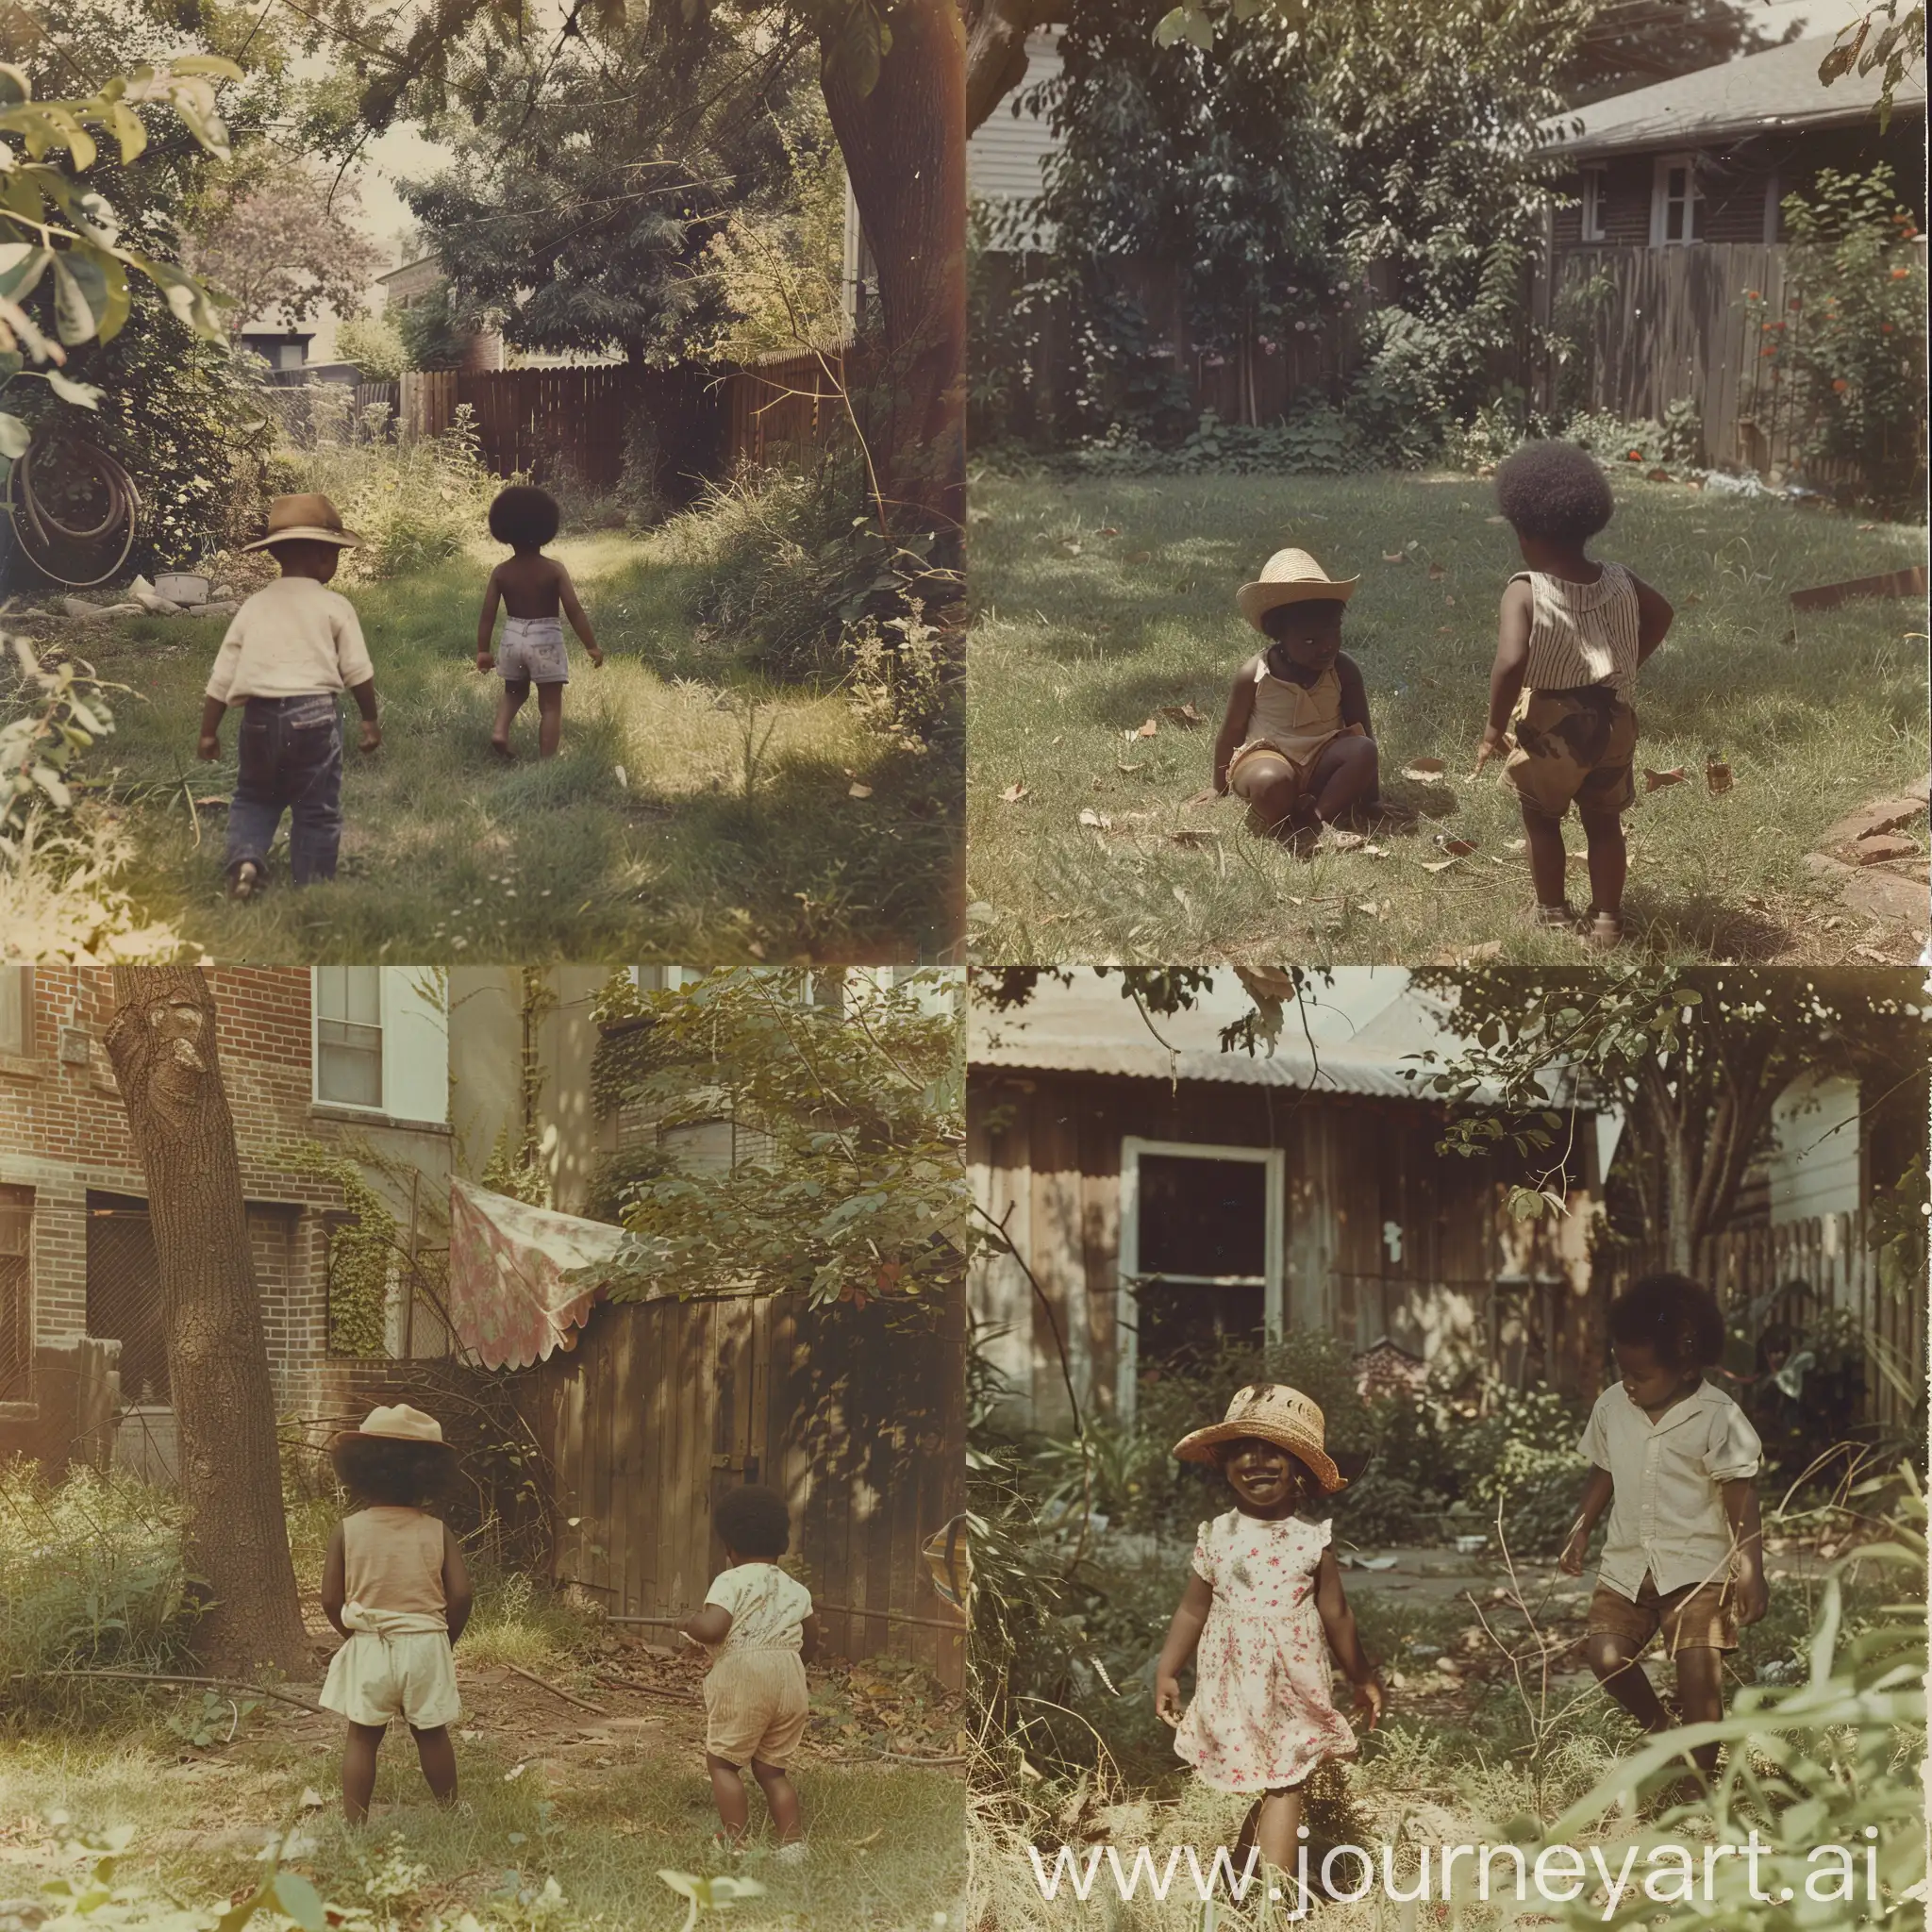 Two-Black-Kids-Playing-in-1980s-Backyard-with-Hat